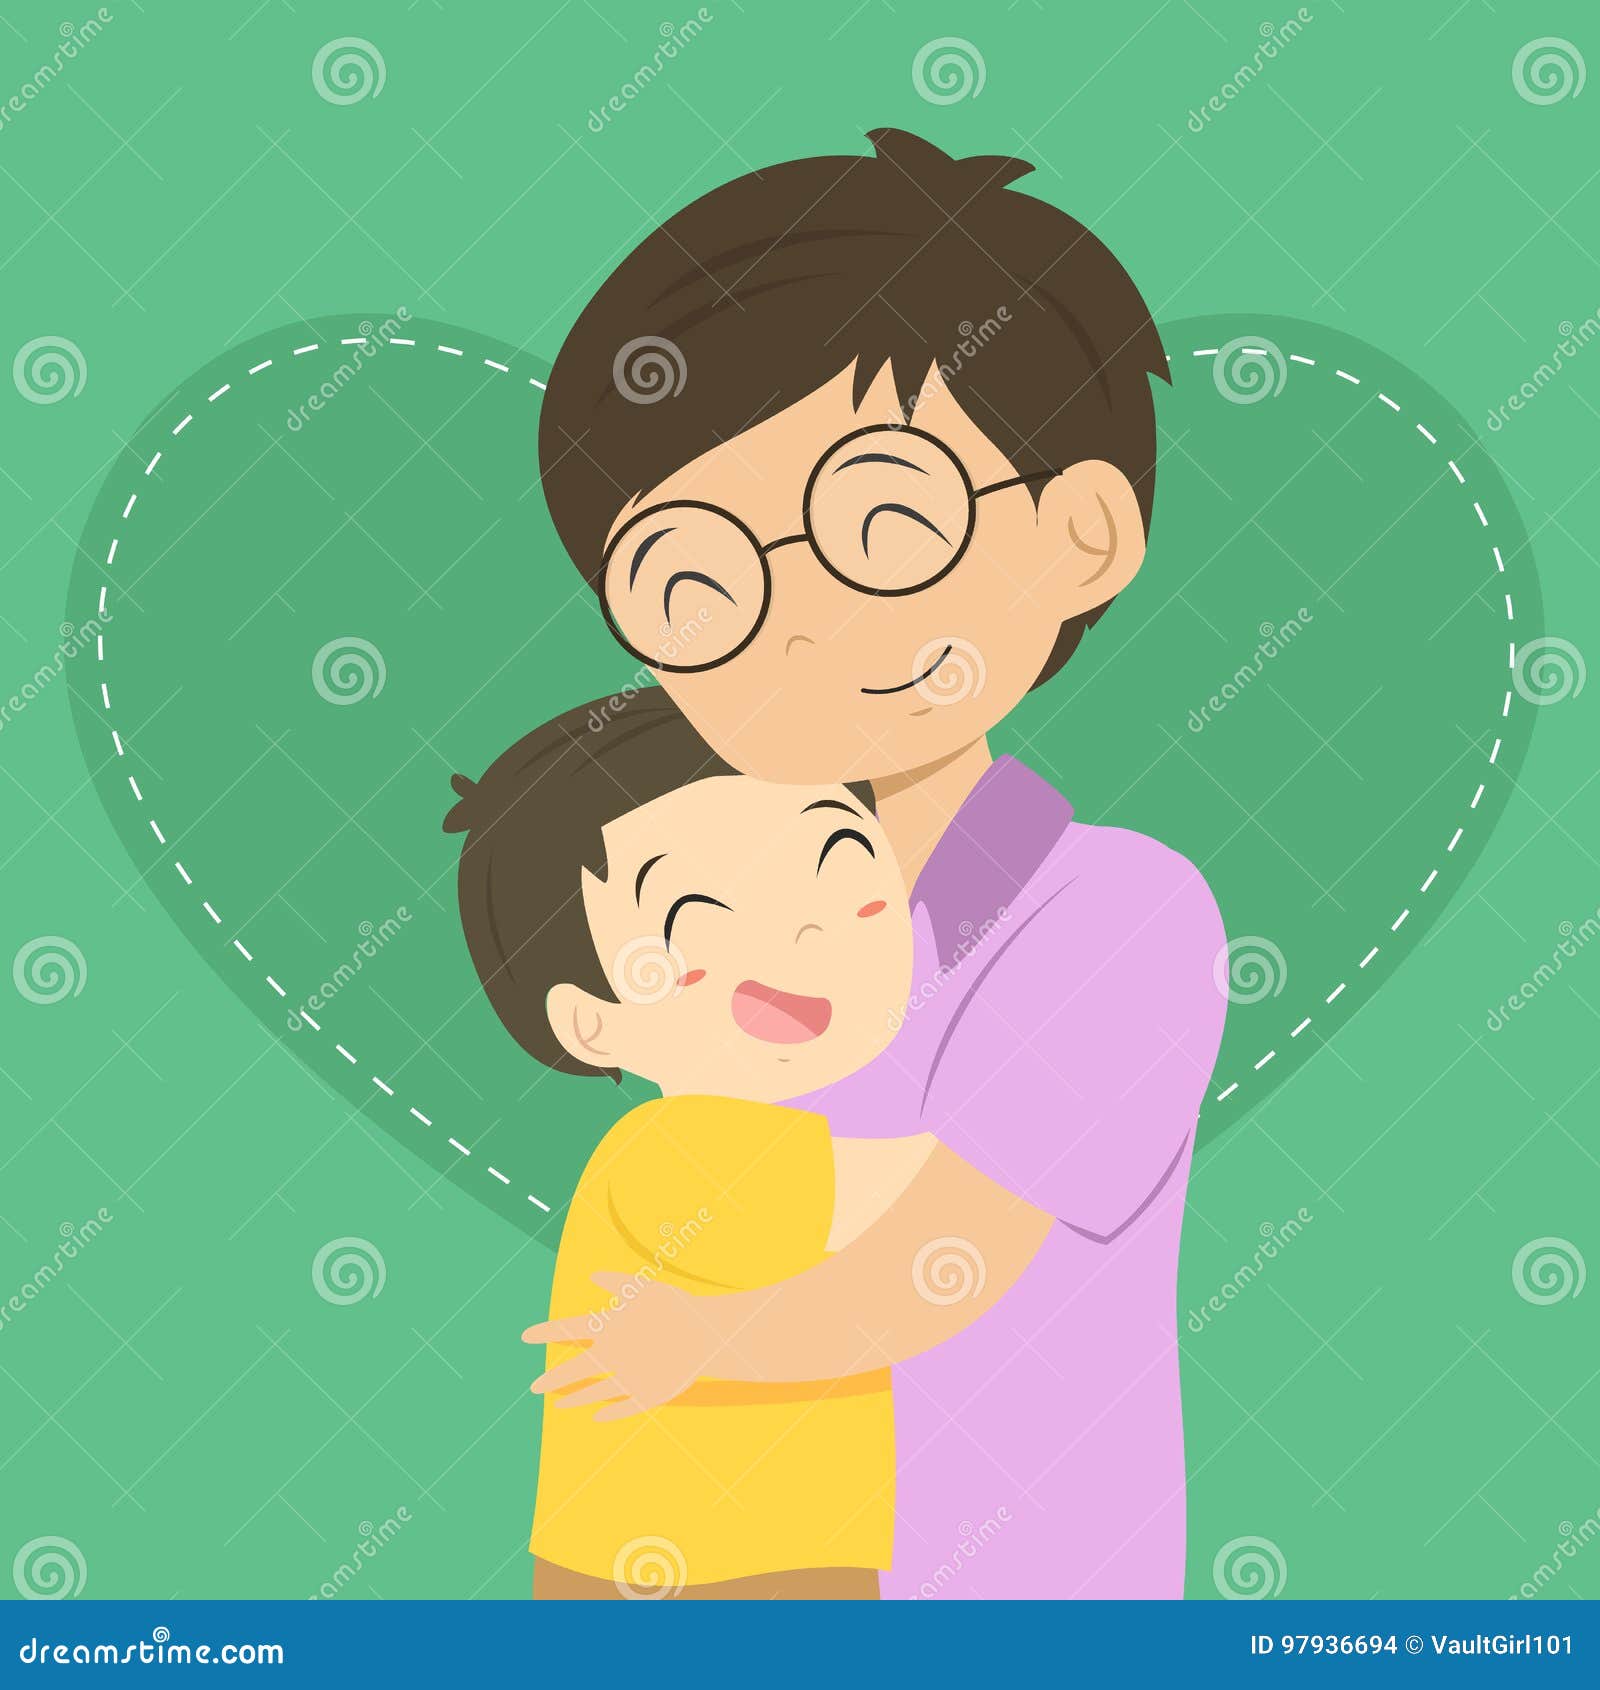 father and son hugging cartoon